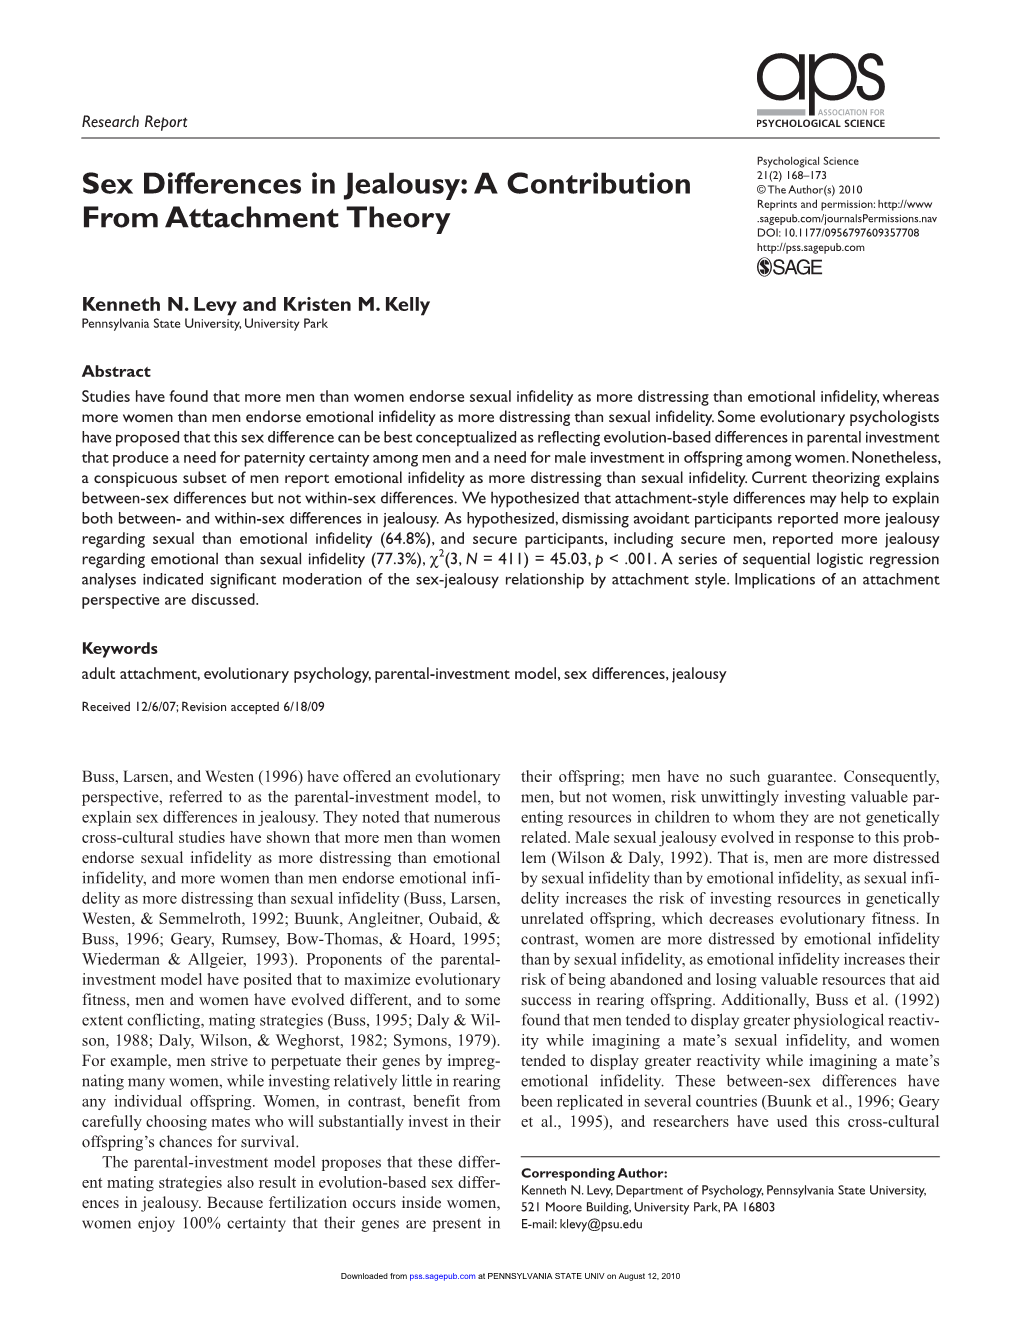 Sex Differences in Jealousy: a Contribution from Attachment Theory